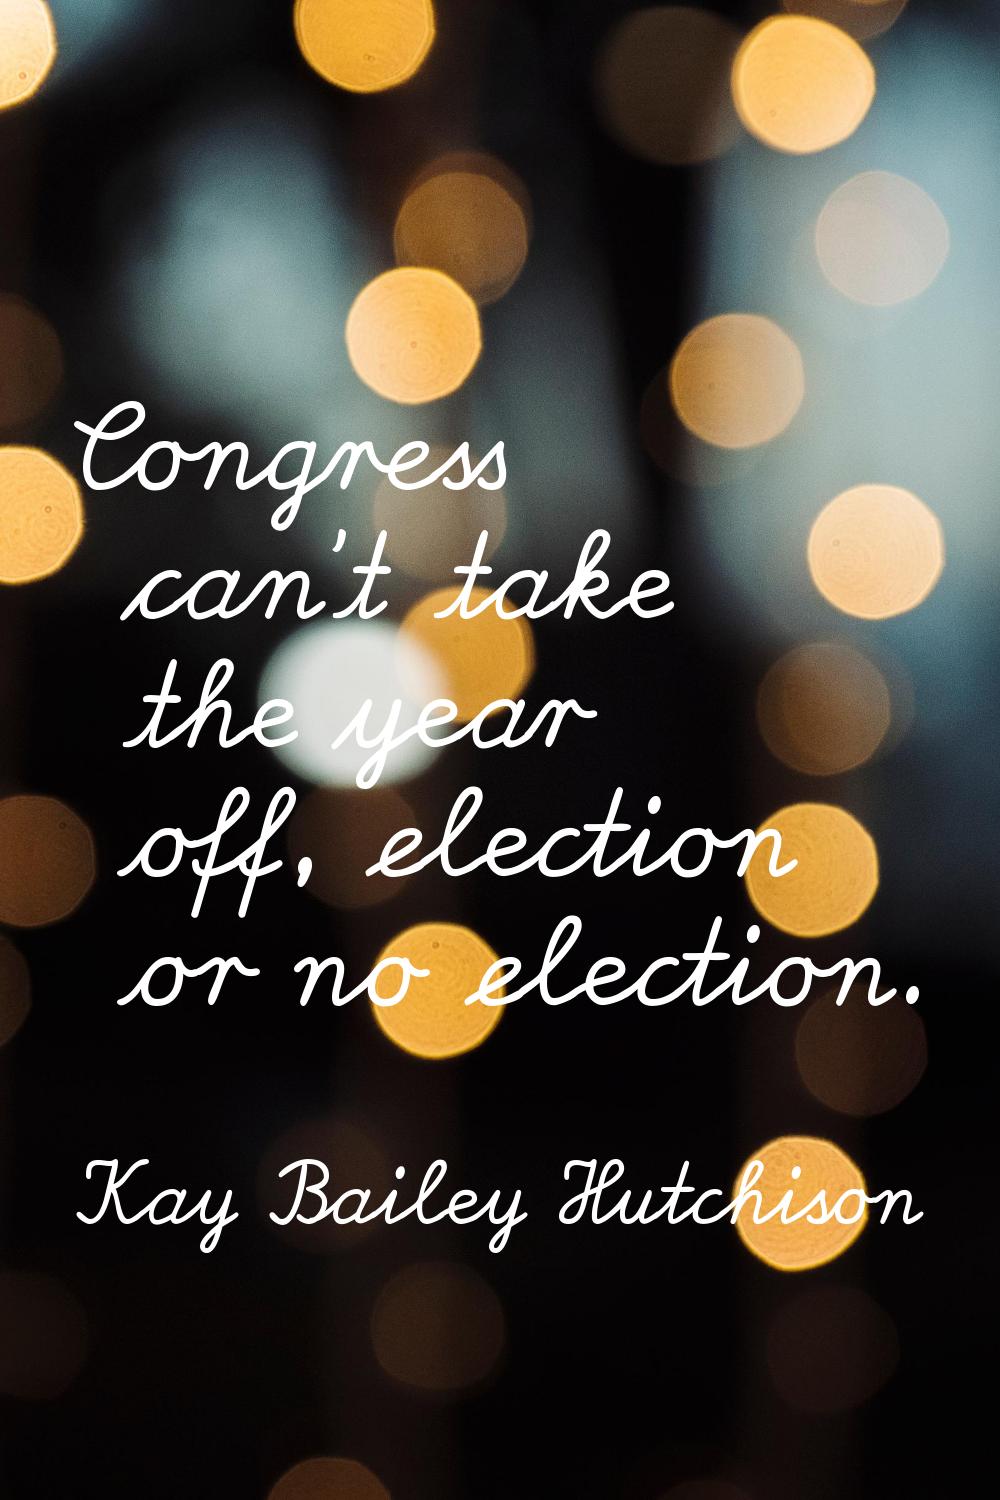 Congress can't take the year off, election or no election.